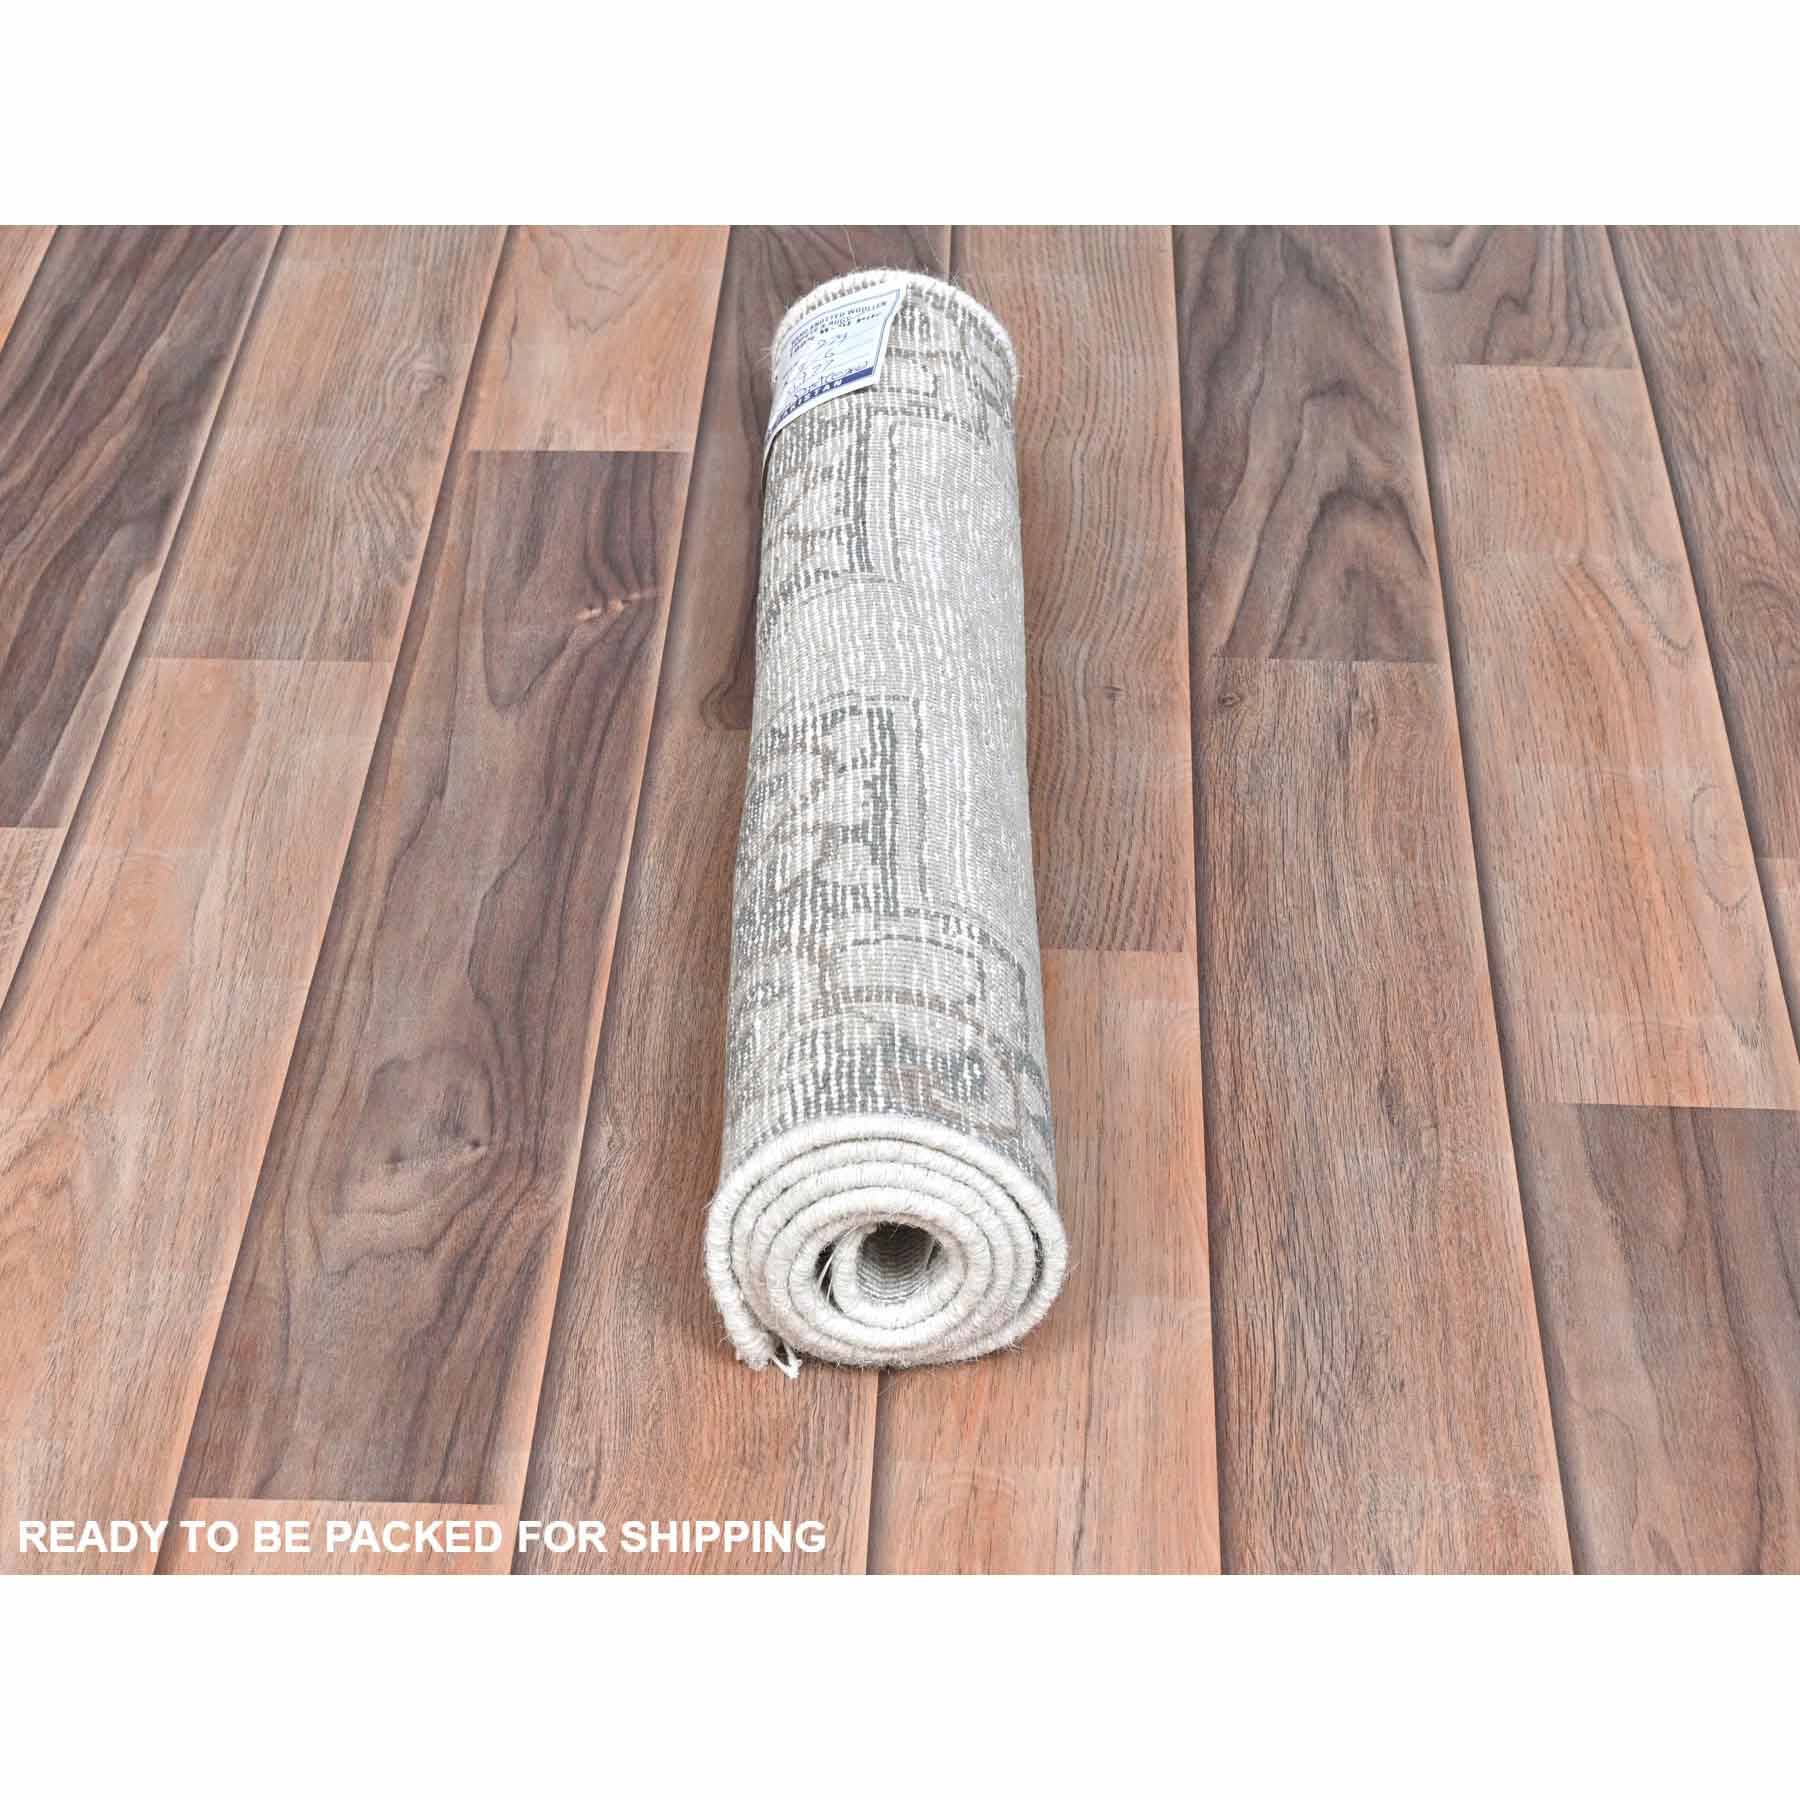 Overdyed-Vintage-Hand-Knotted-Rug-409885